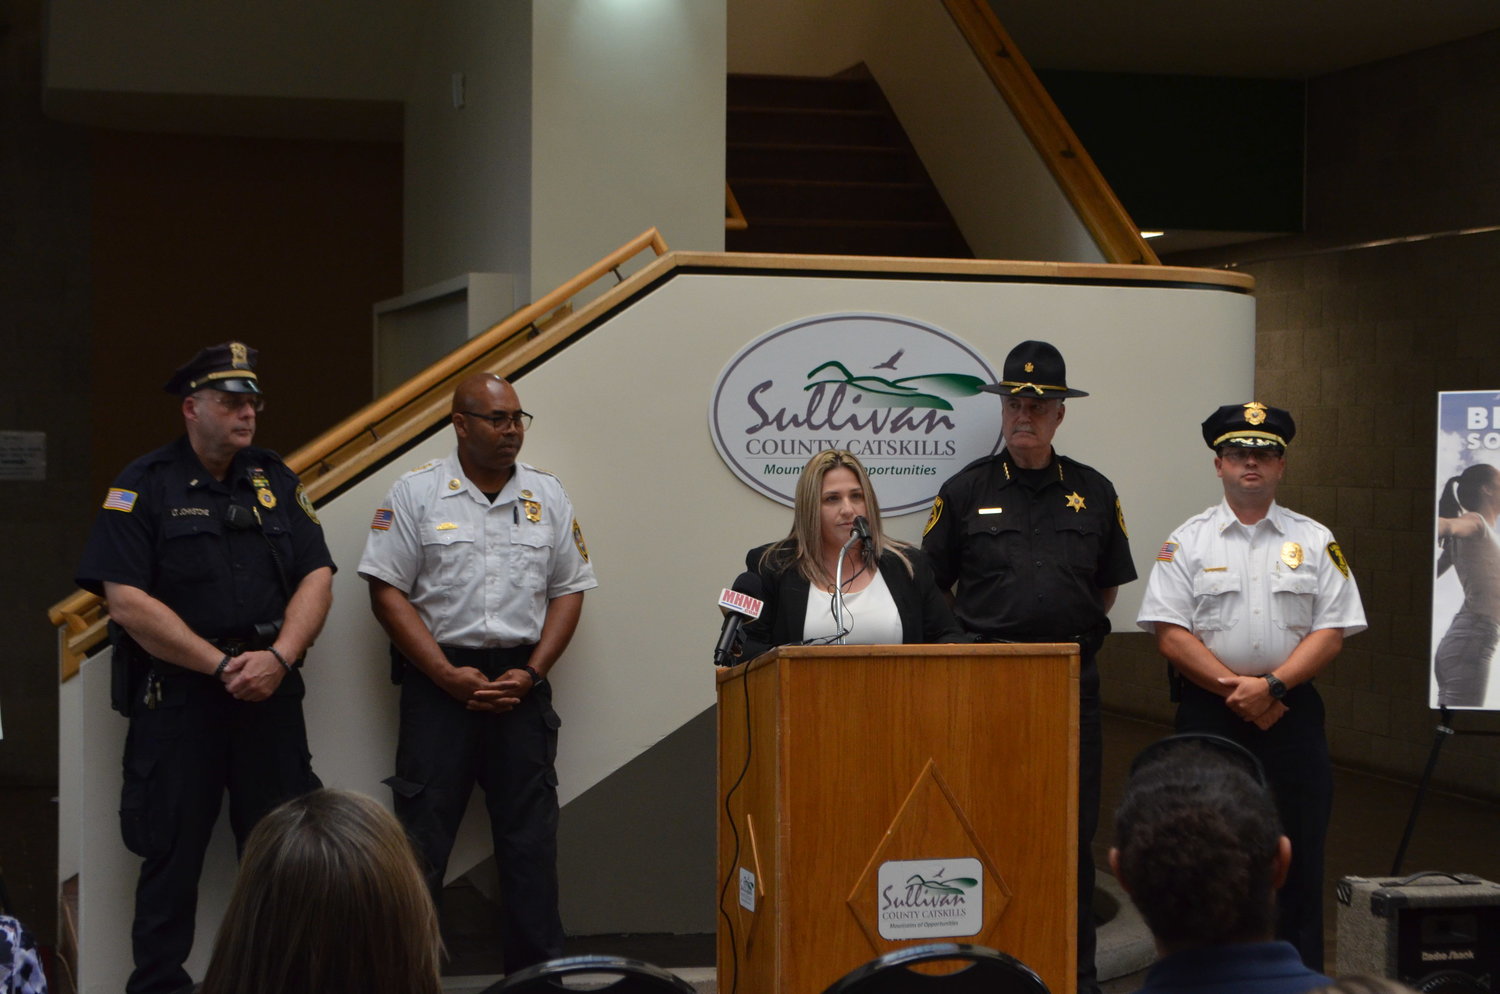 Sullivan County District Attorney Meagan Galligan describes the path to treatment offered by Hope Not Handcuffs, flanked by members of Sullivan County Law Enforcement.